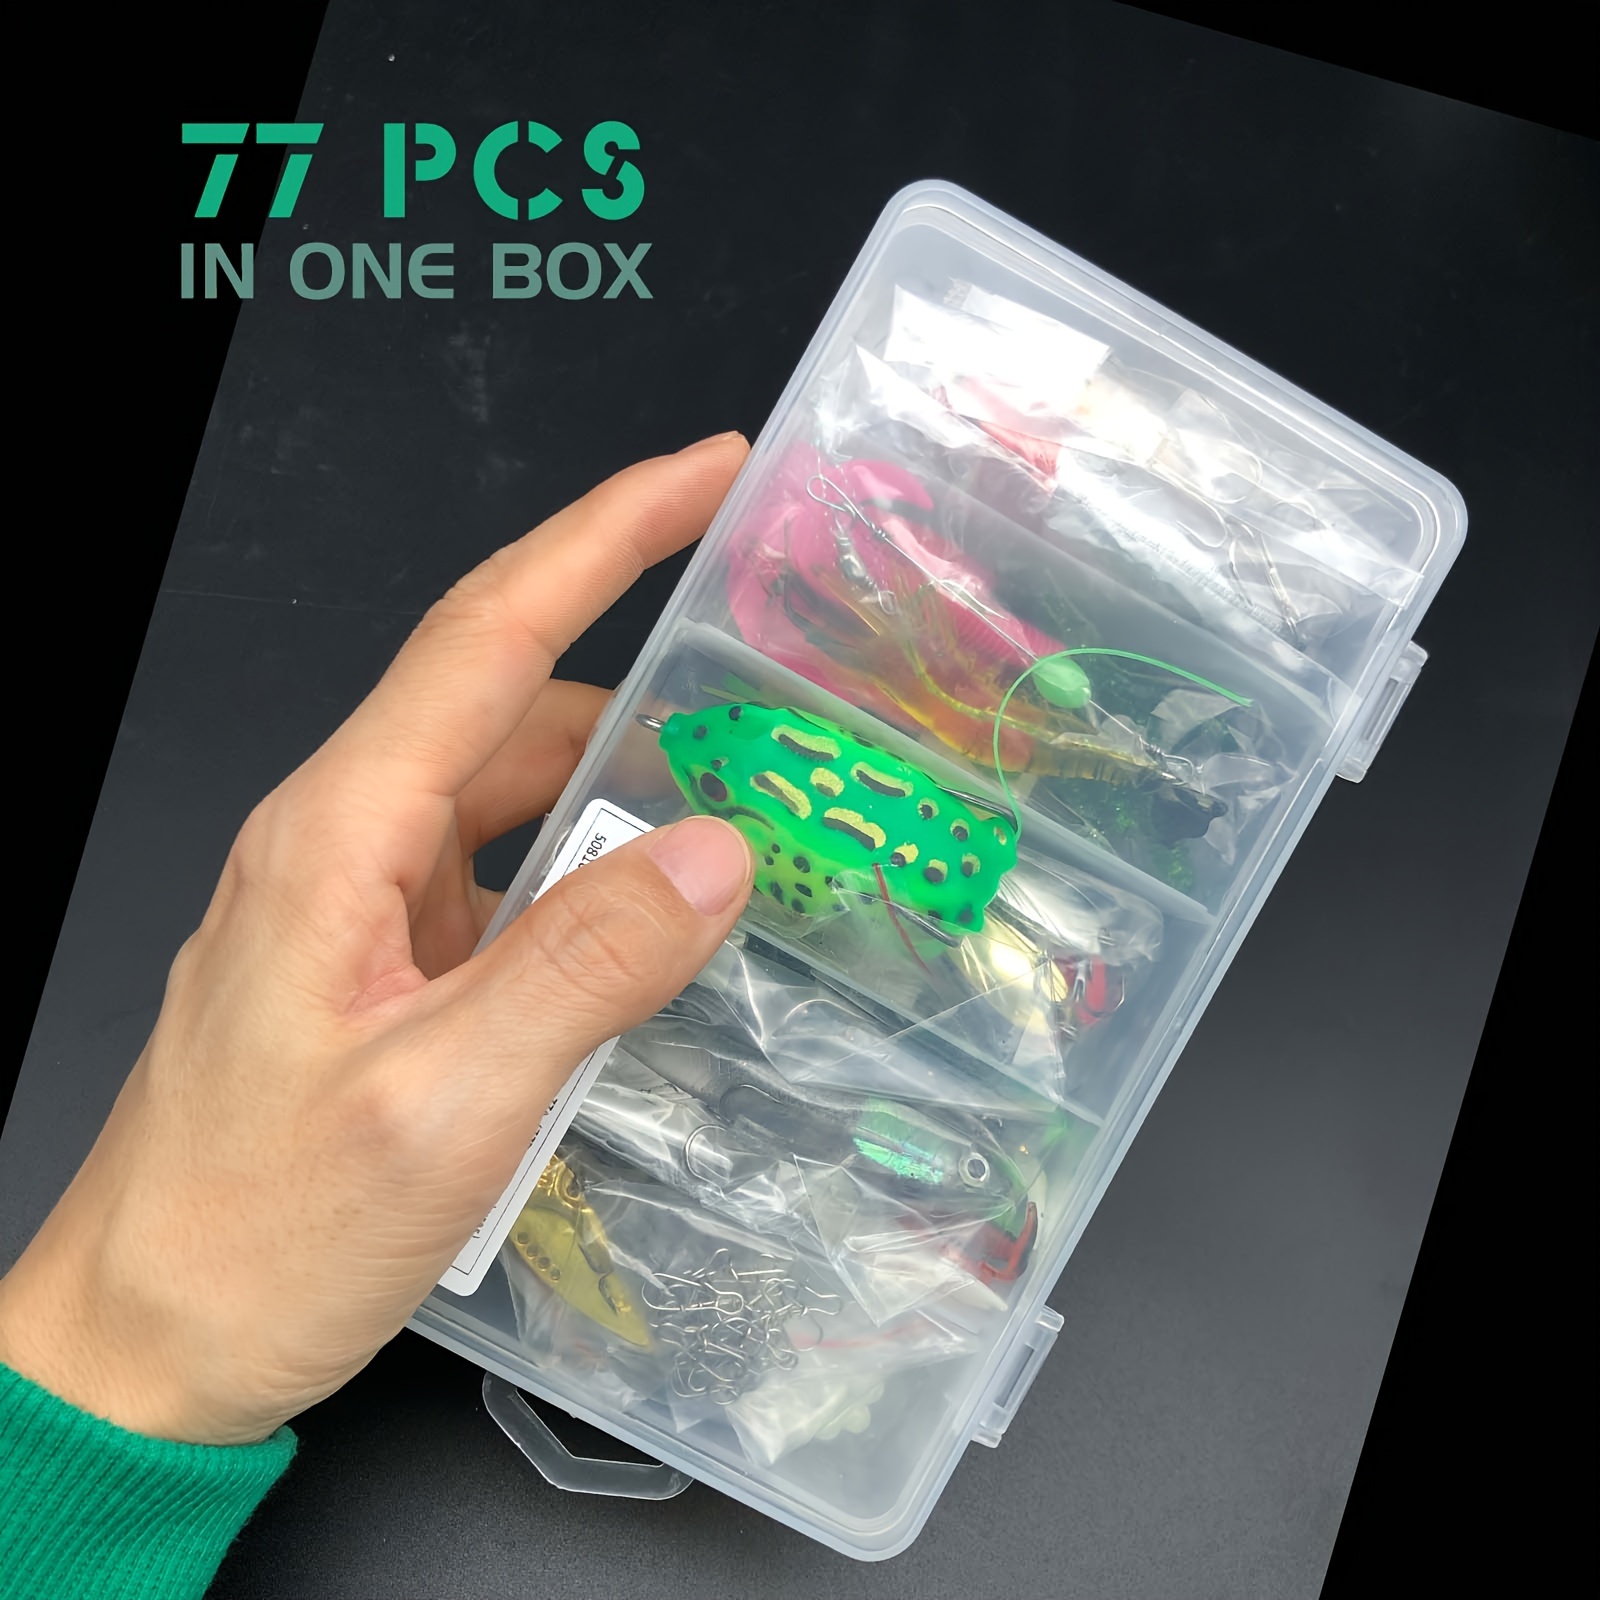 Fishing Lures Baits Kit for Bass Trout Salmon Fishing Tackle Box Including  Spoon Lures Soft Plastic Worms Crankbait Jigs Fishing Hooks 70Pcs Fishing